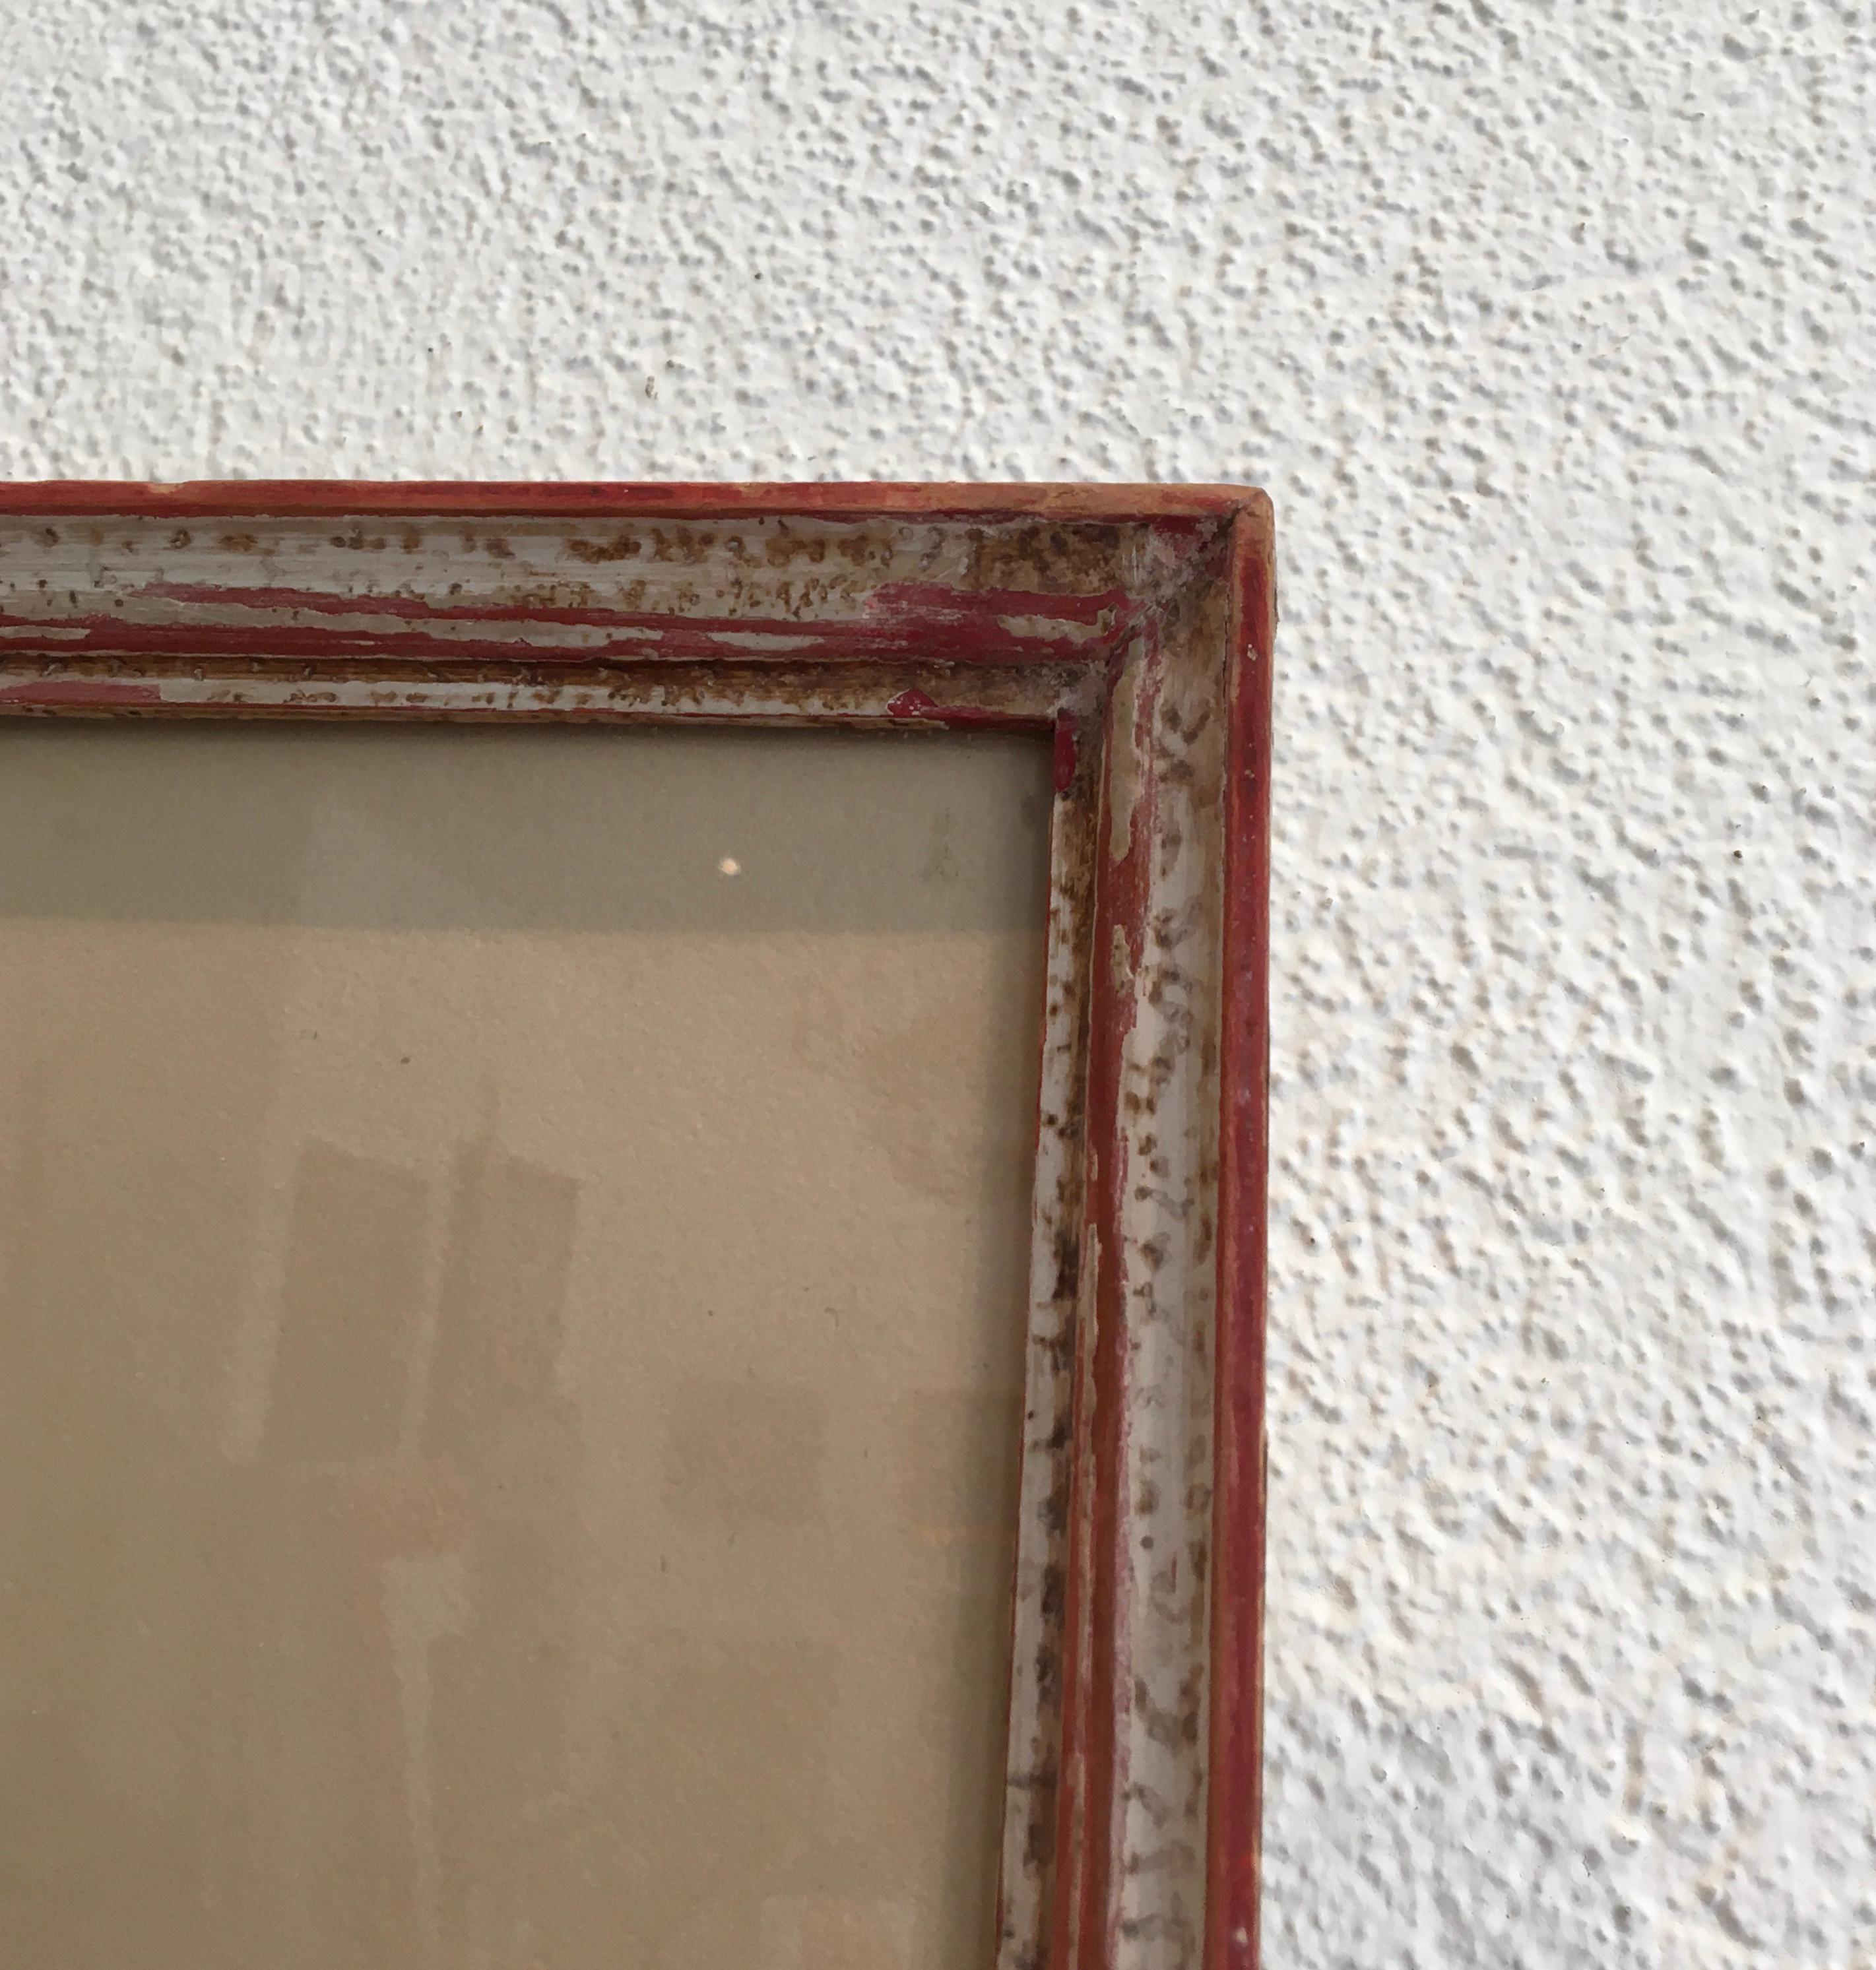 ED : 1/15

Etching on paper
Beige wooden frame, mottled red with glass pane
55.5 x 47.5 x 2.5 cm